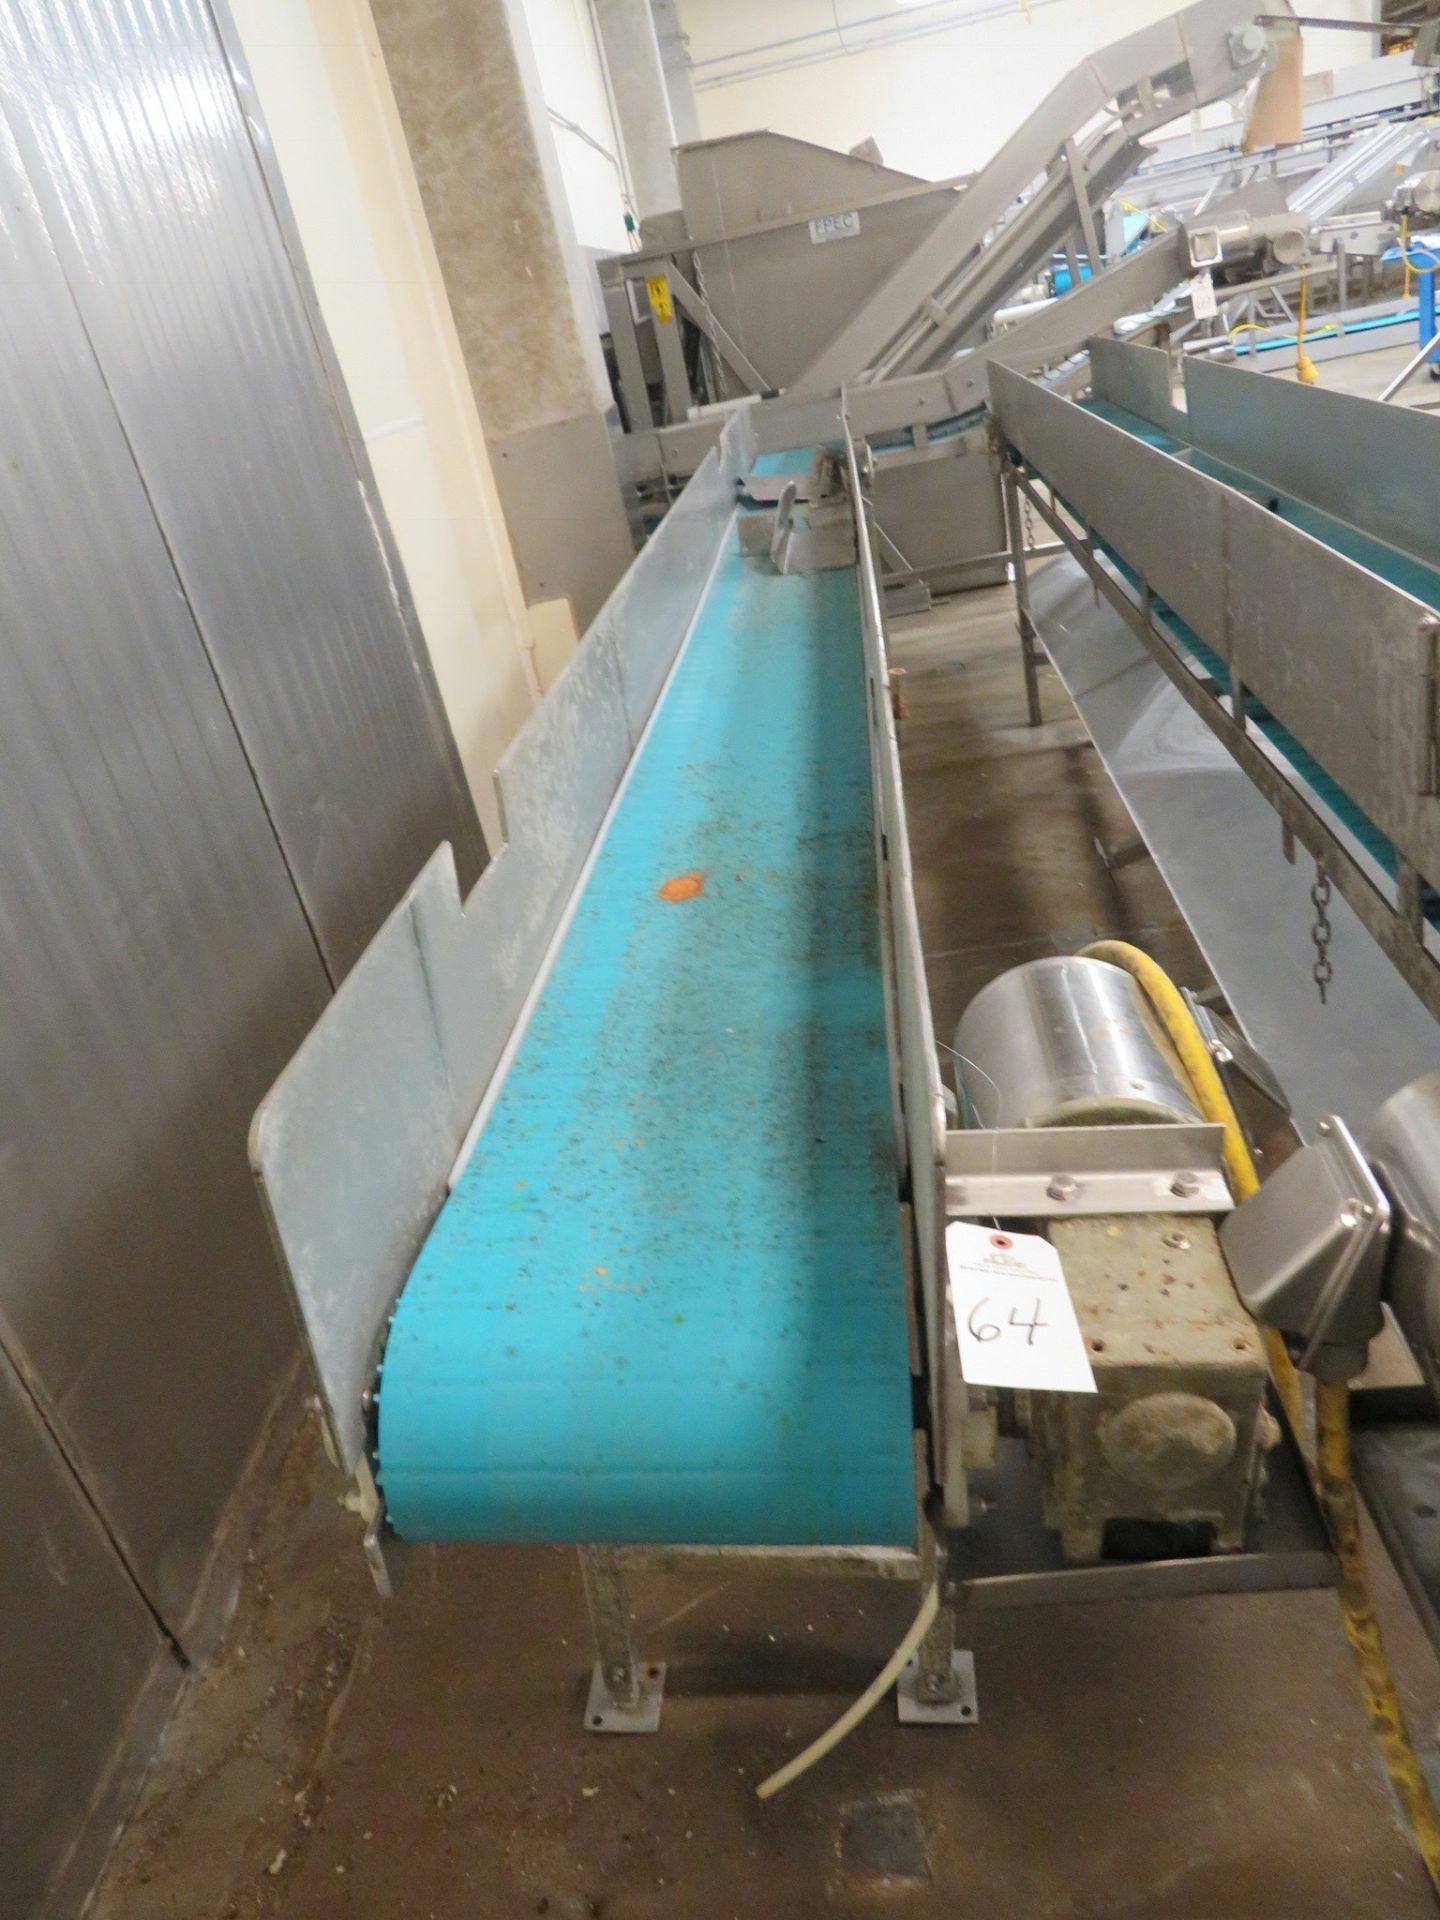 Stainless Steel Conveyor, 12"W x 15'L | Rigging Fee: $150